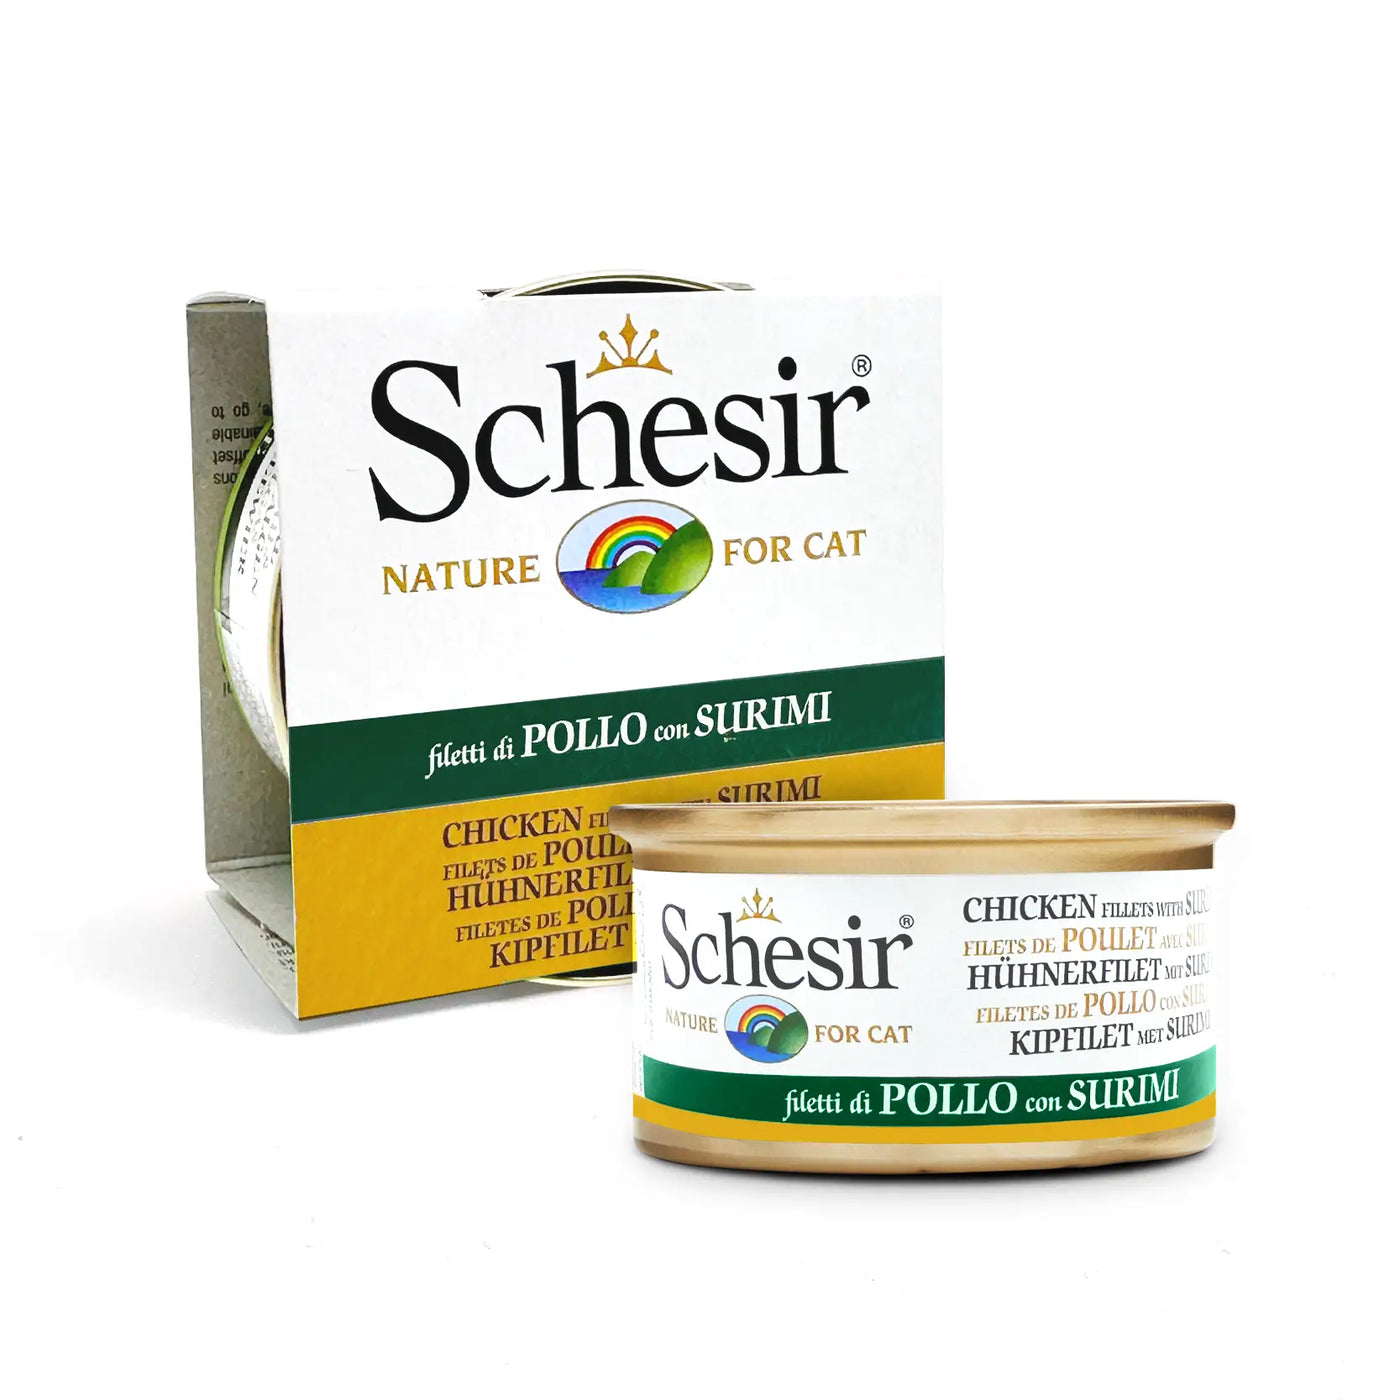 Schesir - Complementary Wet Food For Adult Cats - Chicken Fillets With Surimi 85g